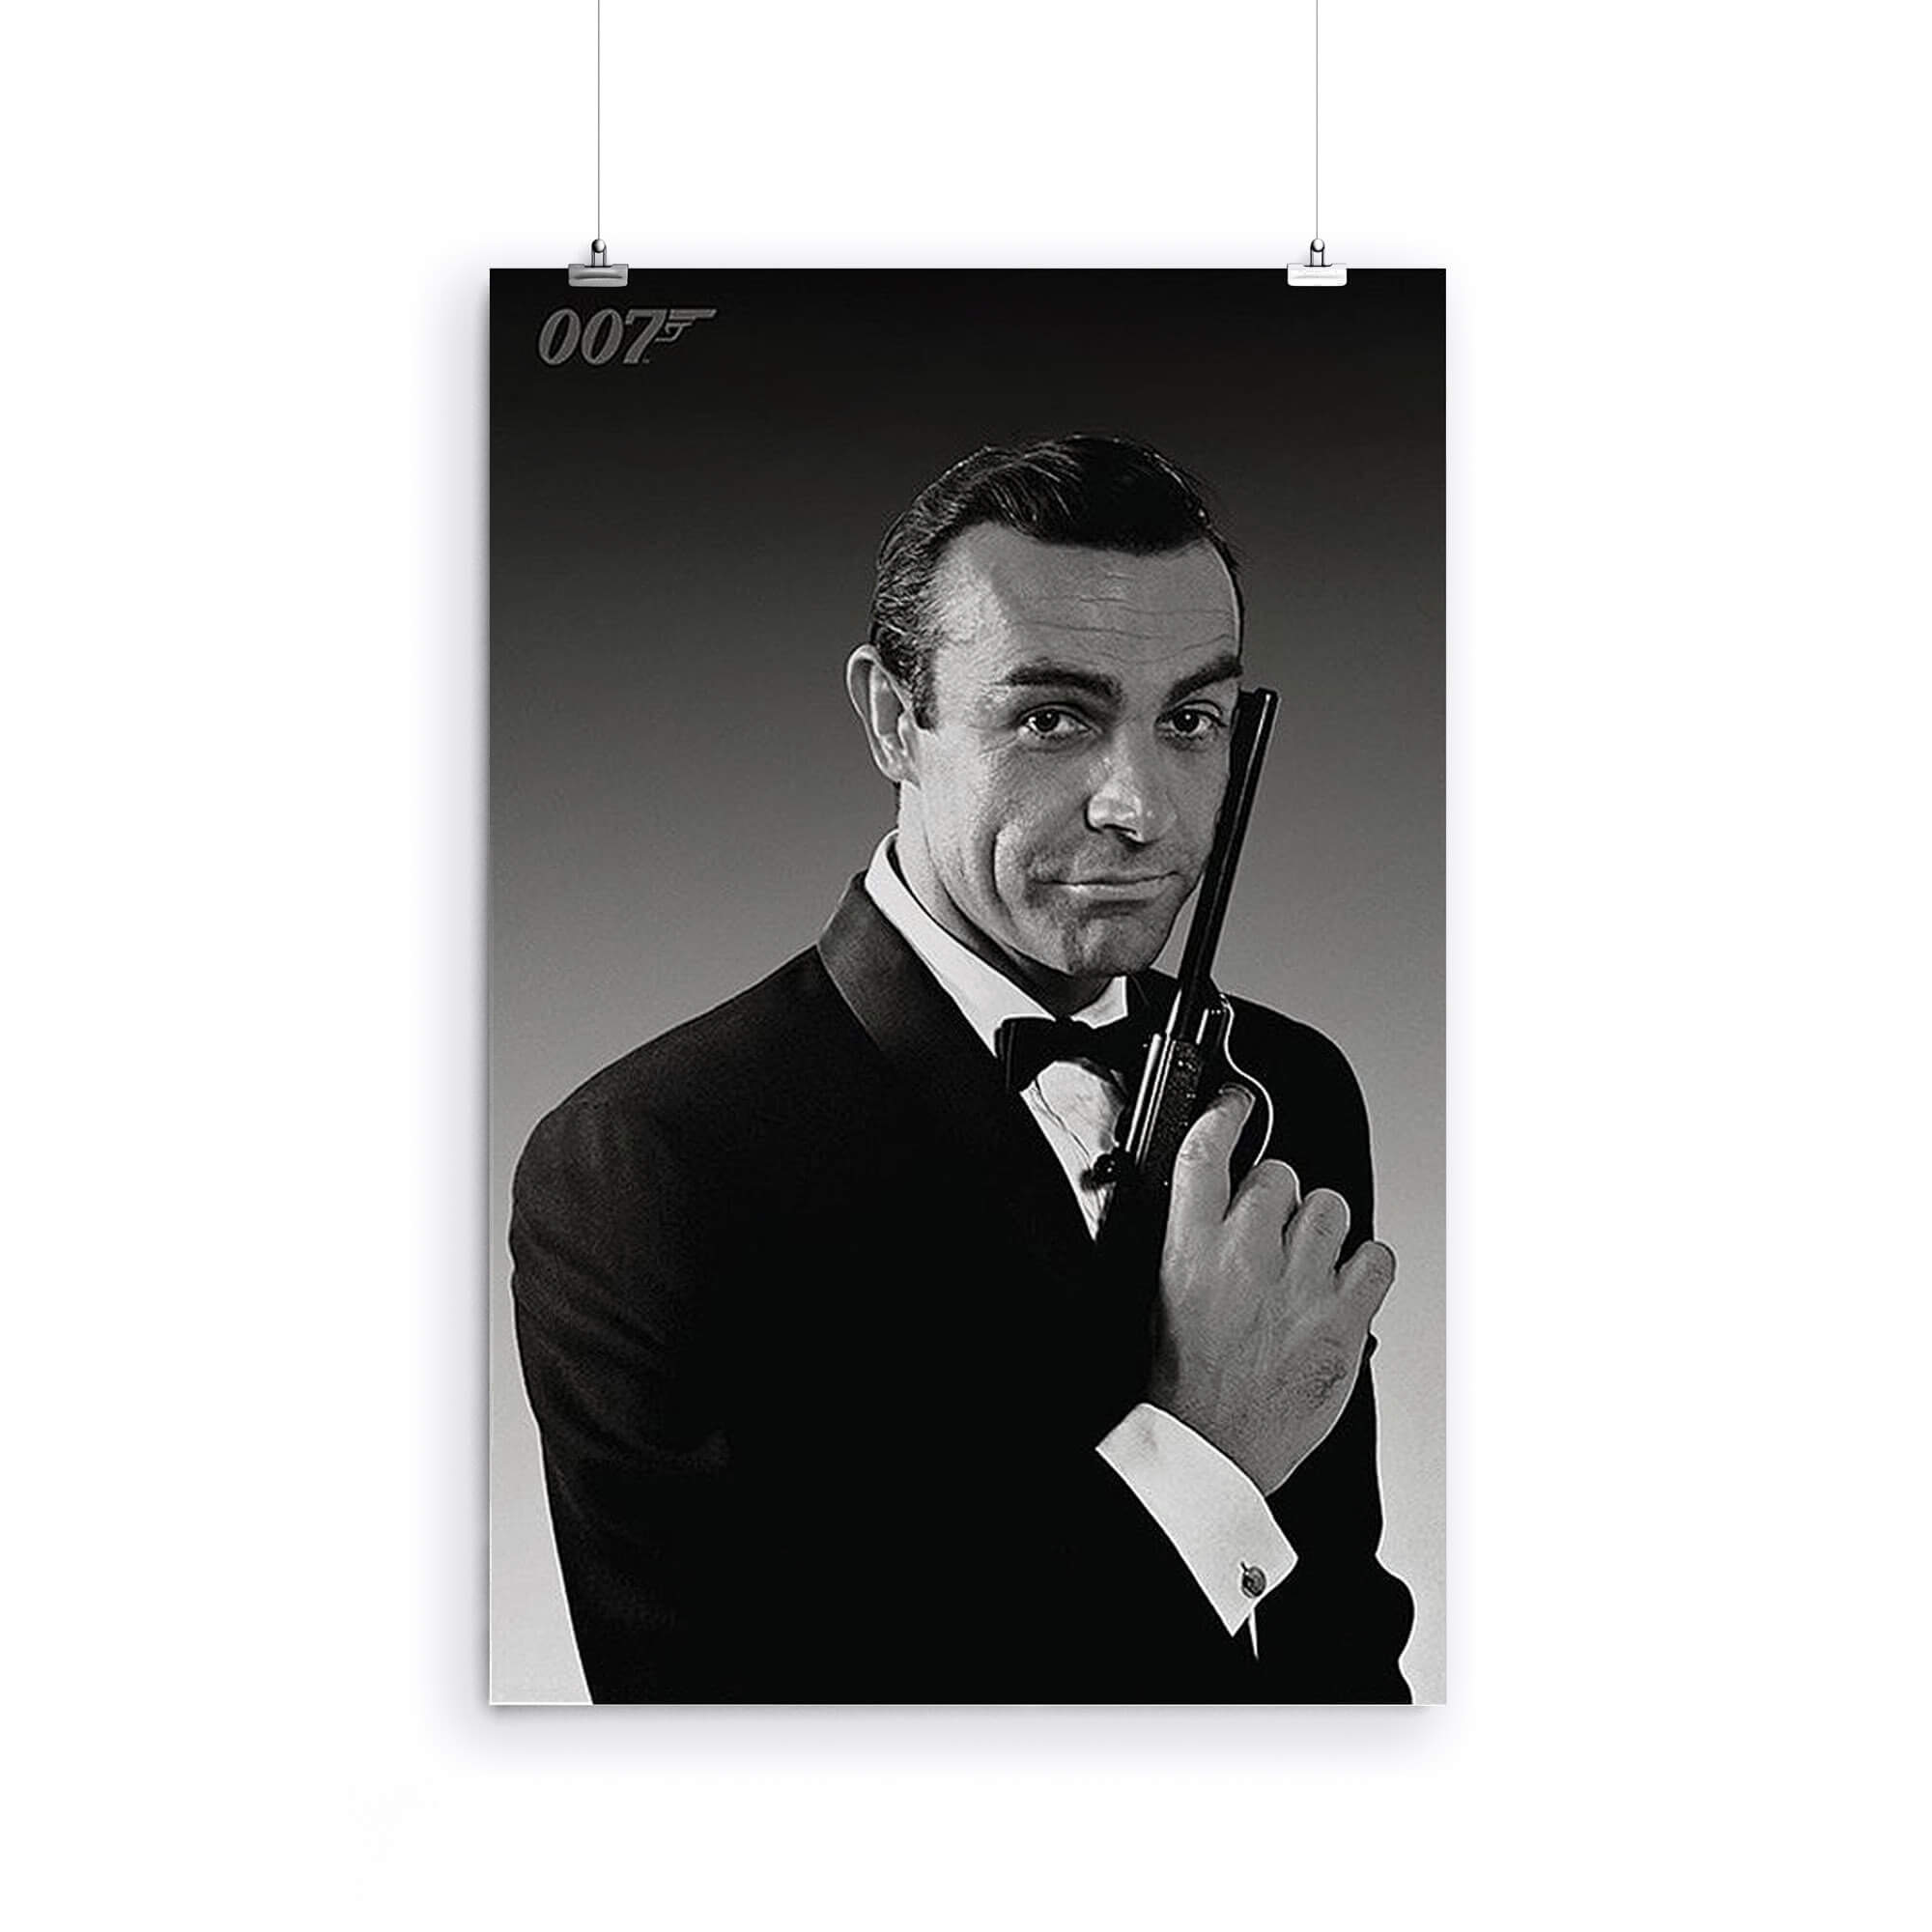 Poster Sean Connery 007